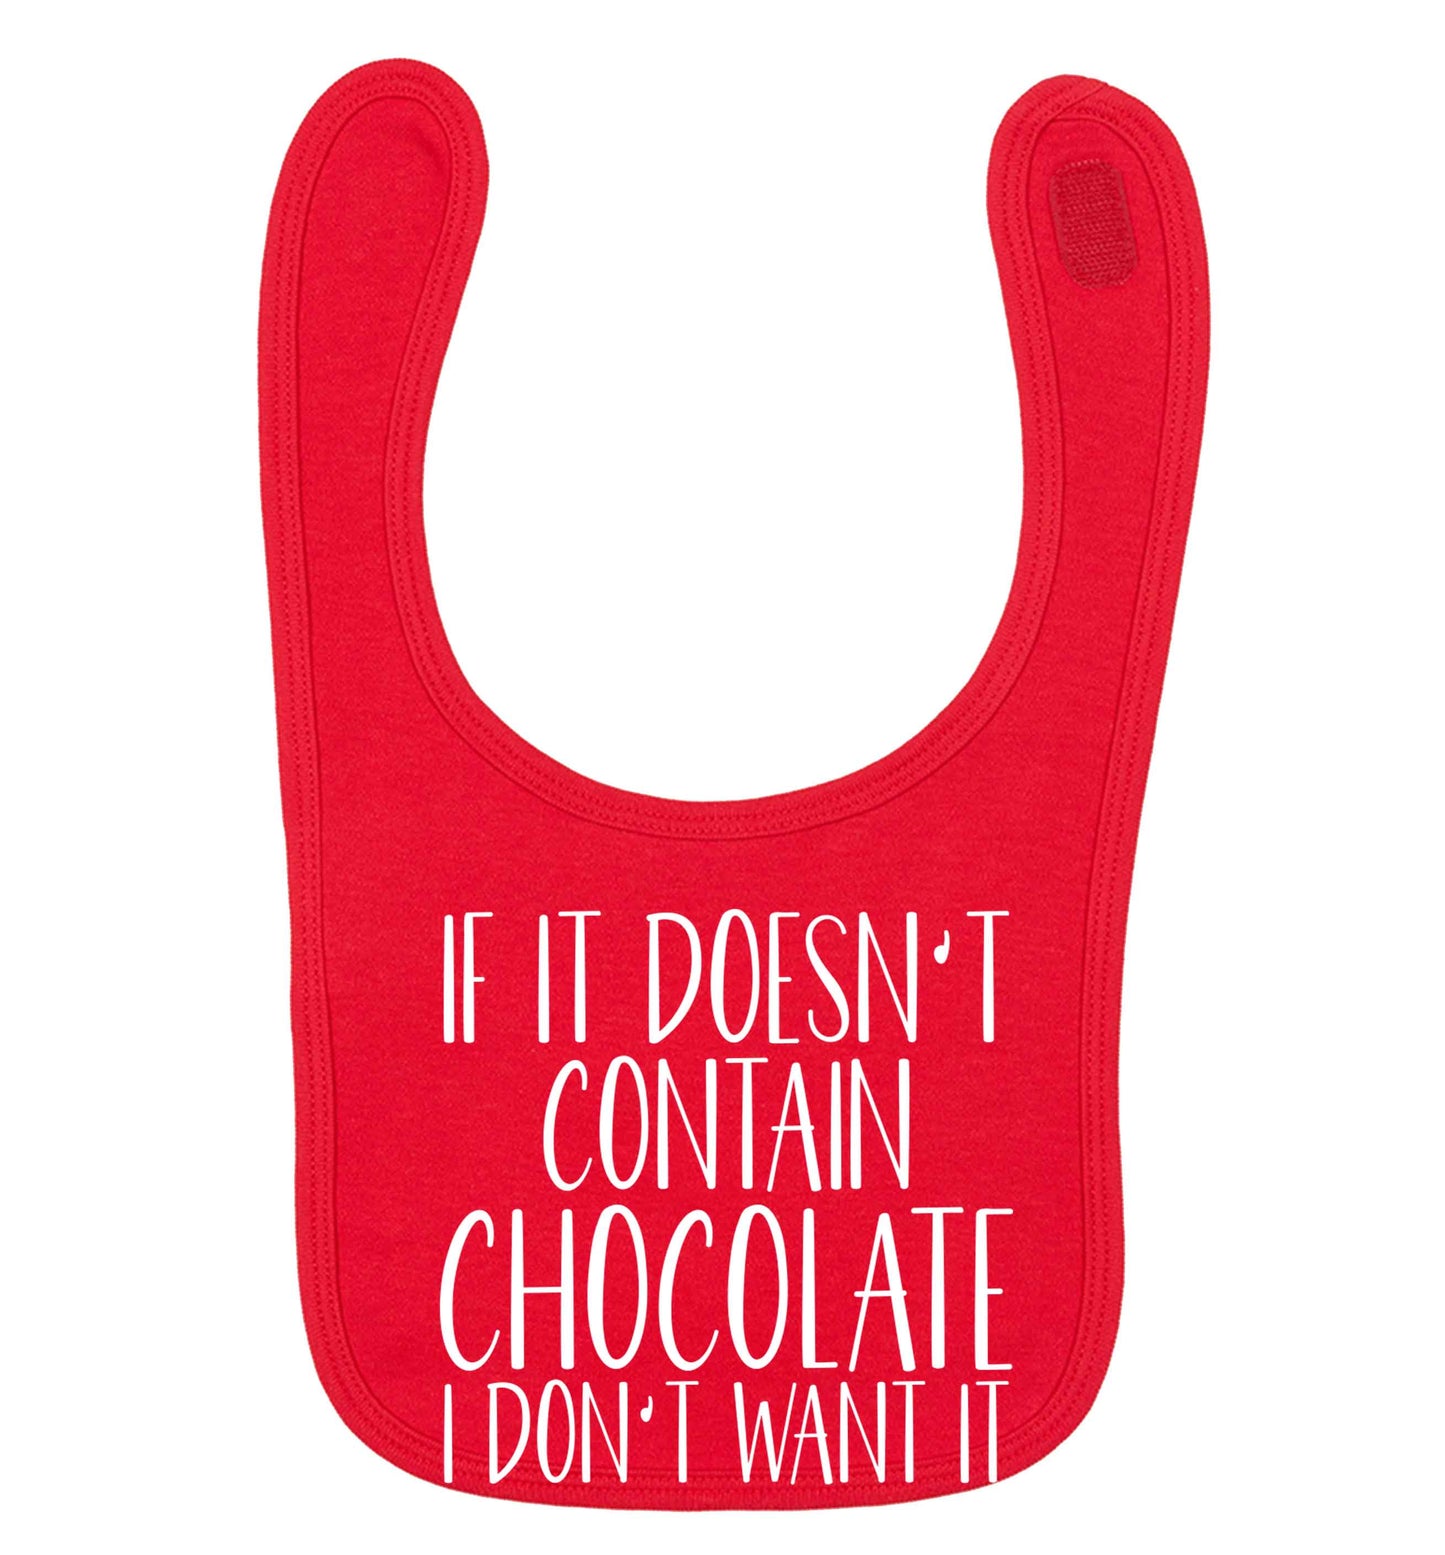 If it doesn't contain chocolate I don't want it red baby bib